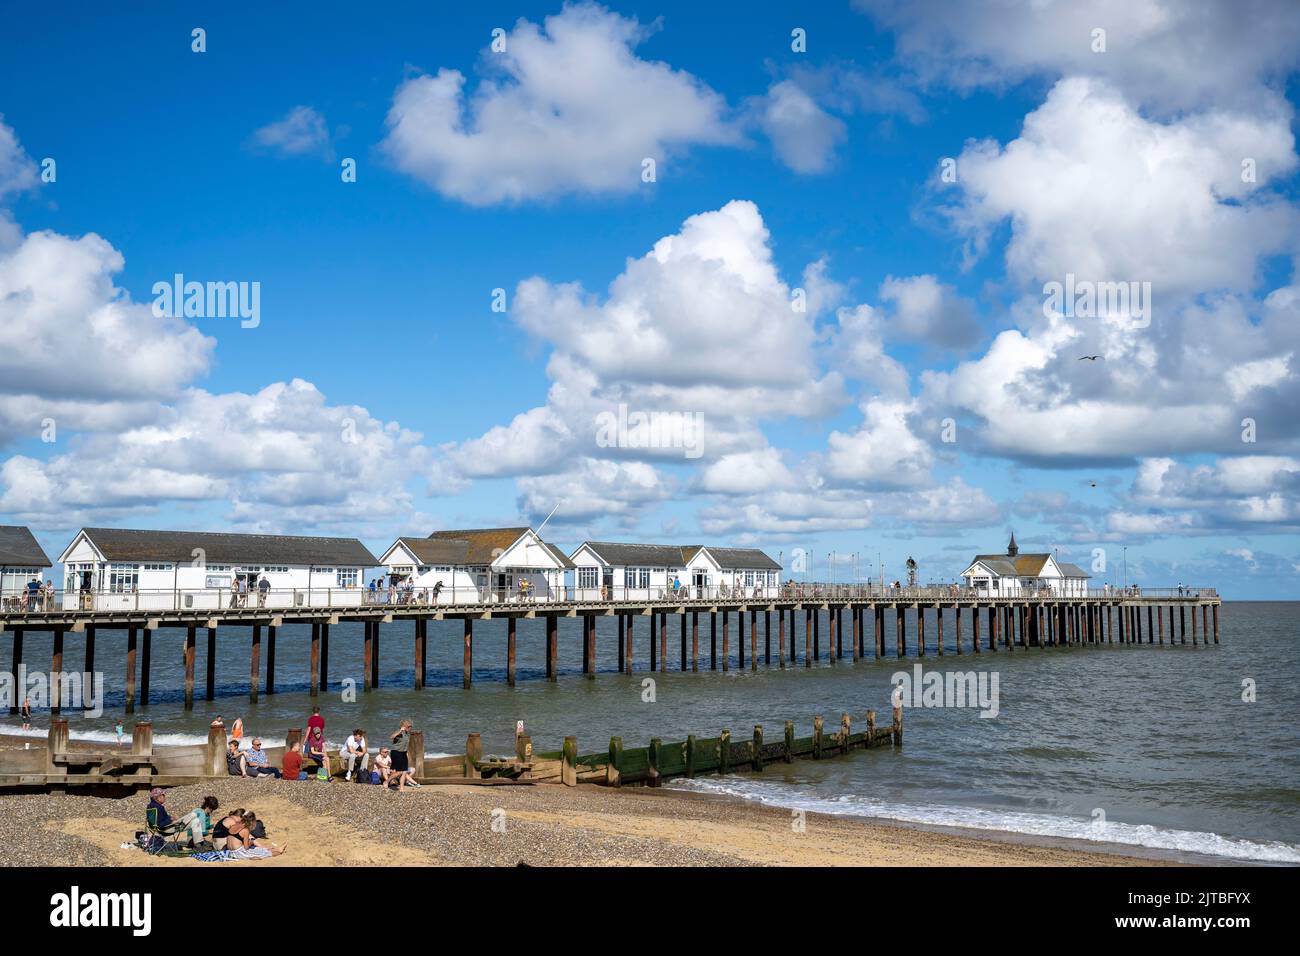 A general view of Southwold Pier in Southwold, Suffolk, England. Stock Photo